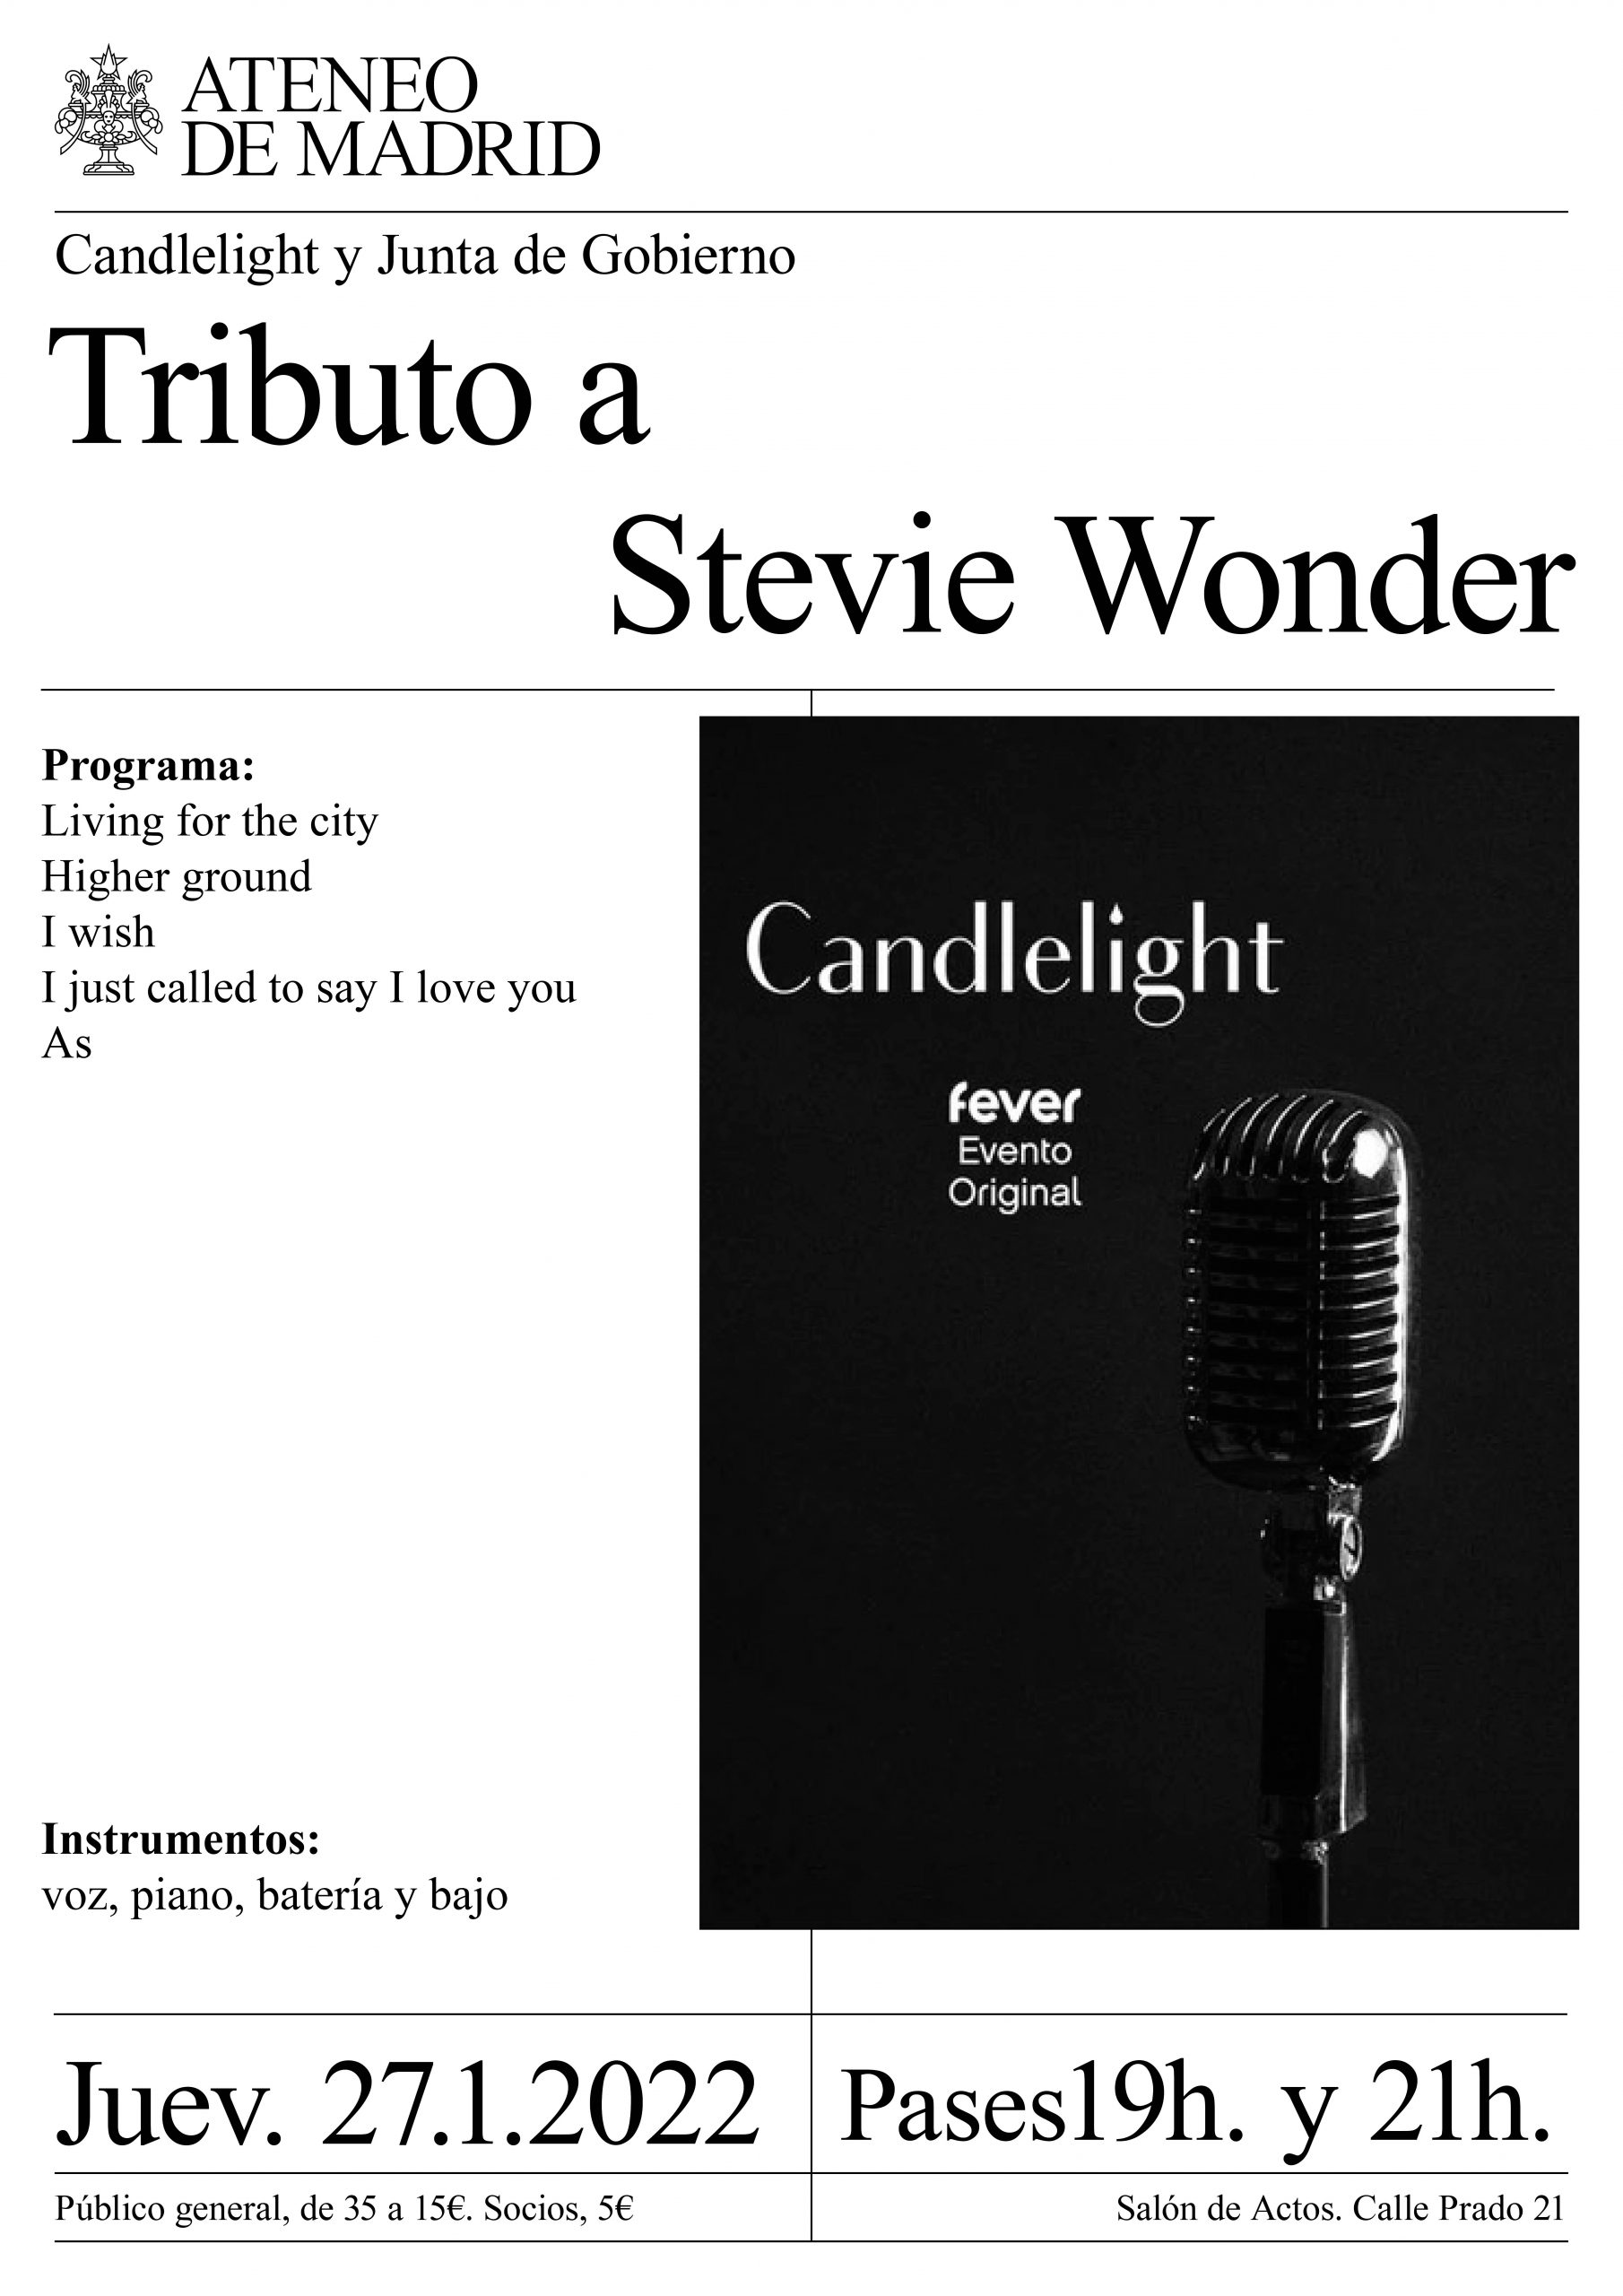 Candlelight: Tributo a Stevie Wonder.